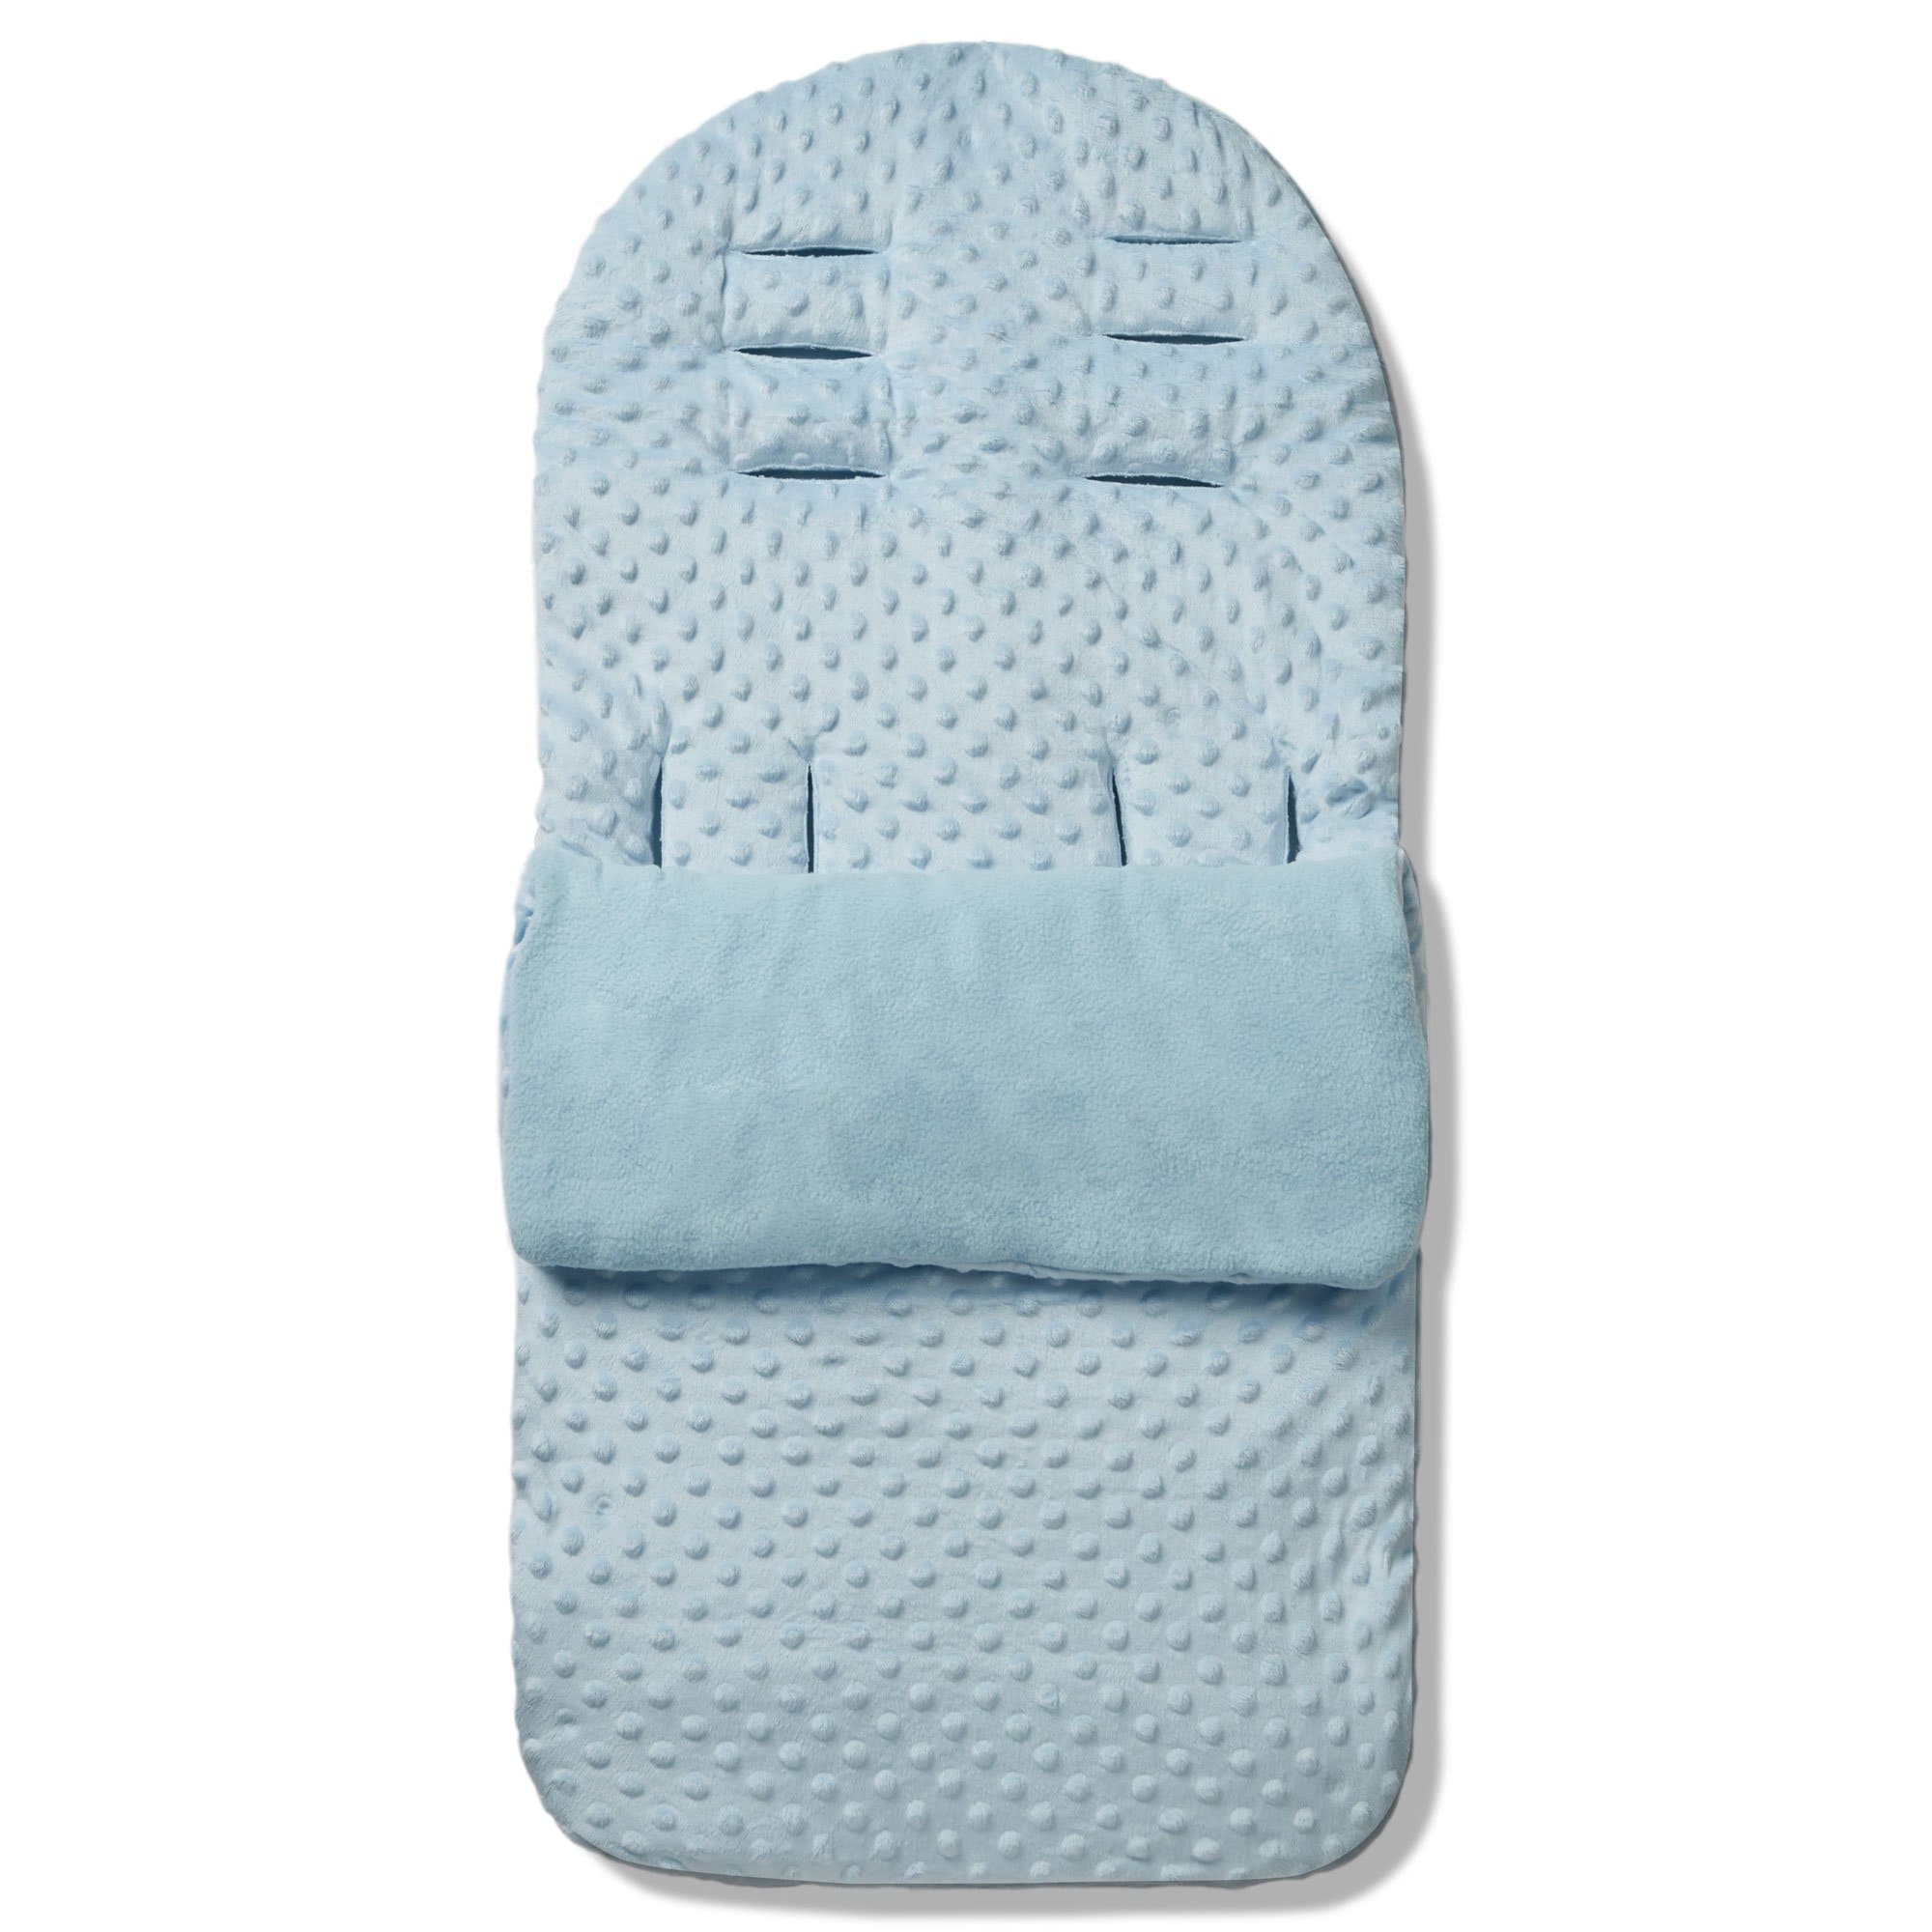 Dimple Footmuff / Cosy Toes Compatible with Bloom - Blue / Fits All Models | For Your Little One